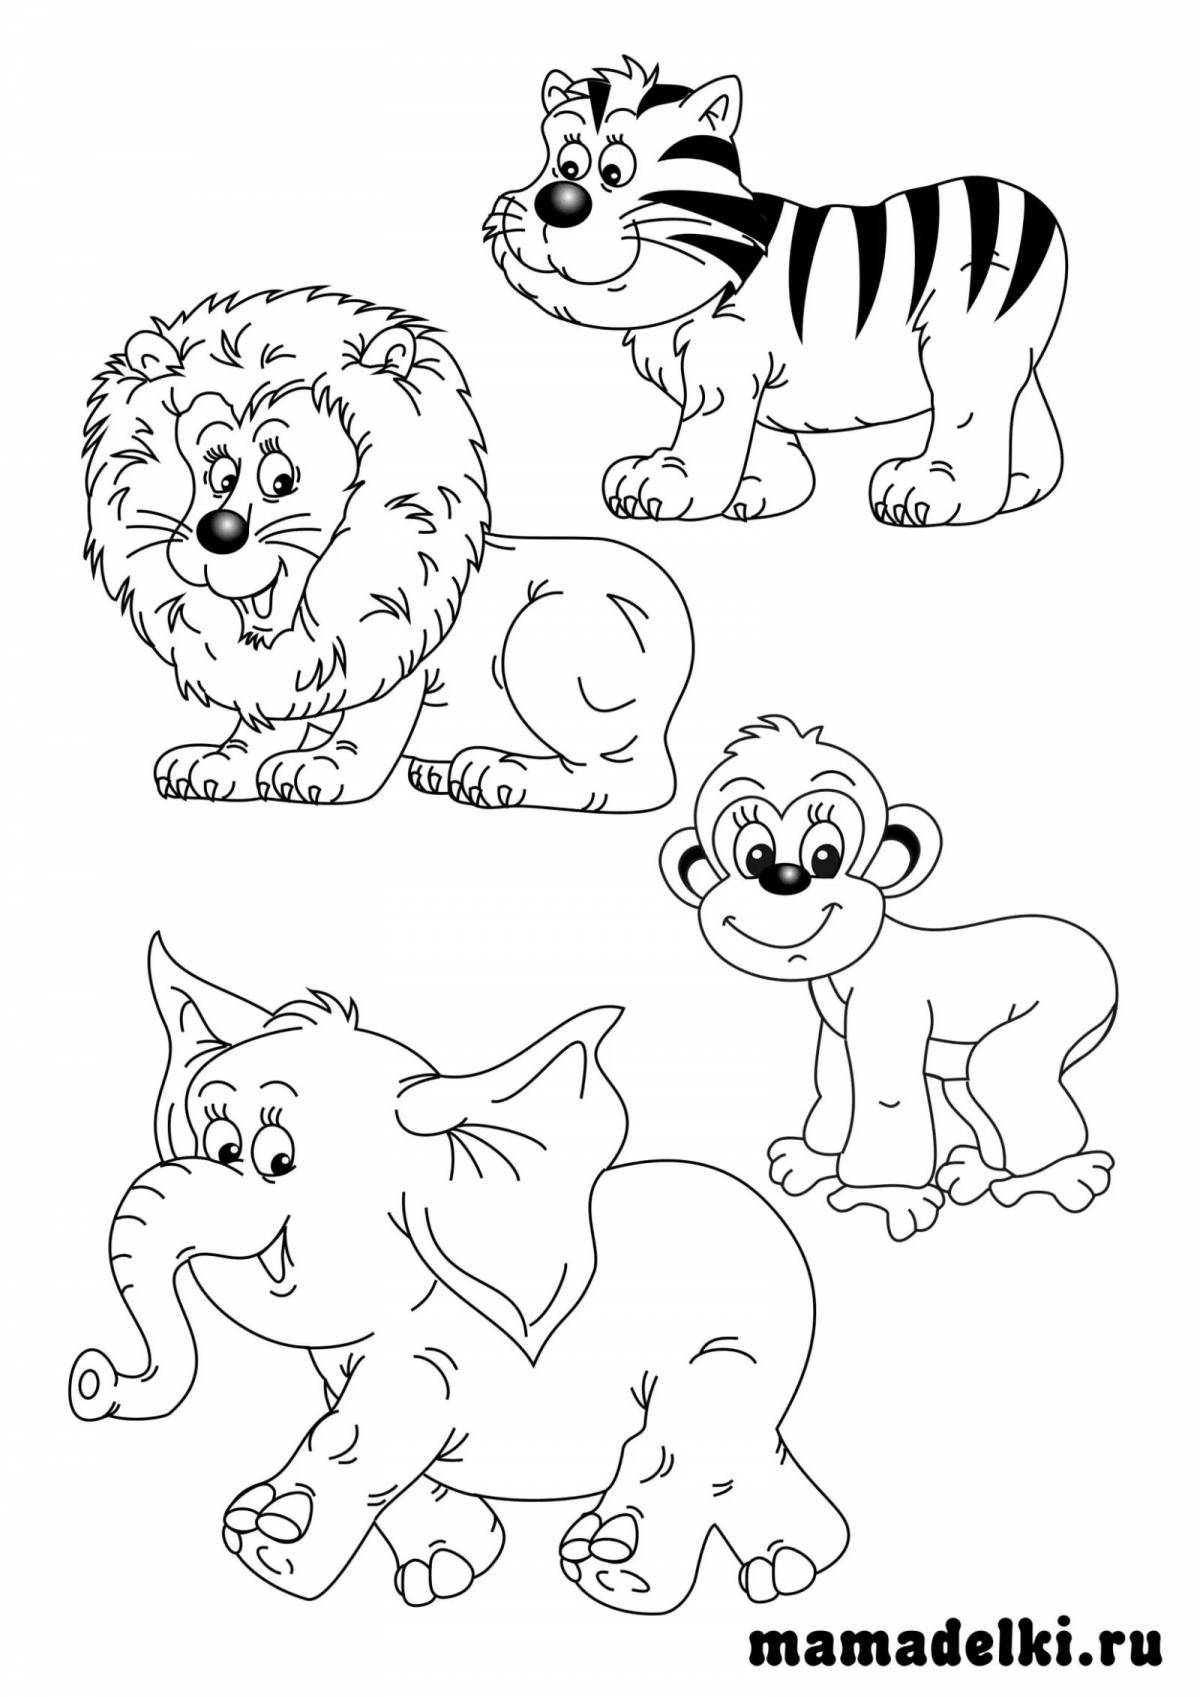 Majestic animal coloring pages for kids